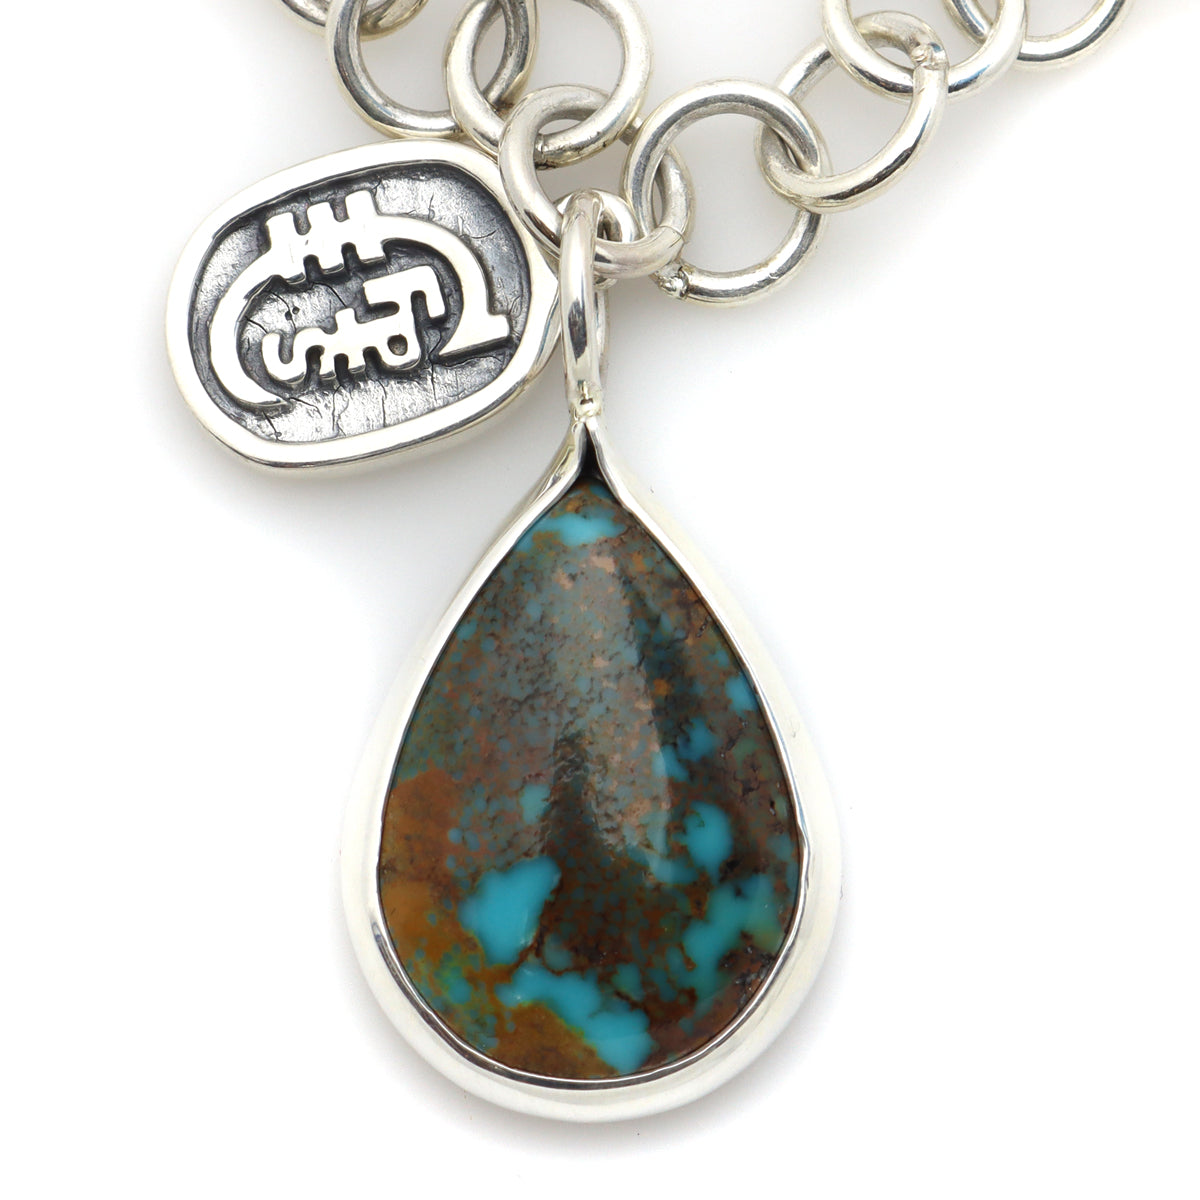 Sam Patania Collection - "Aja" Treated Naja Turquoise and Sterling Silver Silver Bracelet, size 7 (J91699-1220-008) 1
